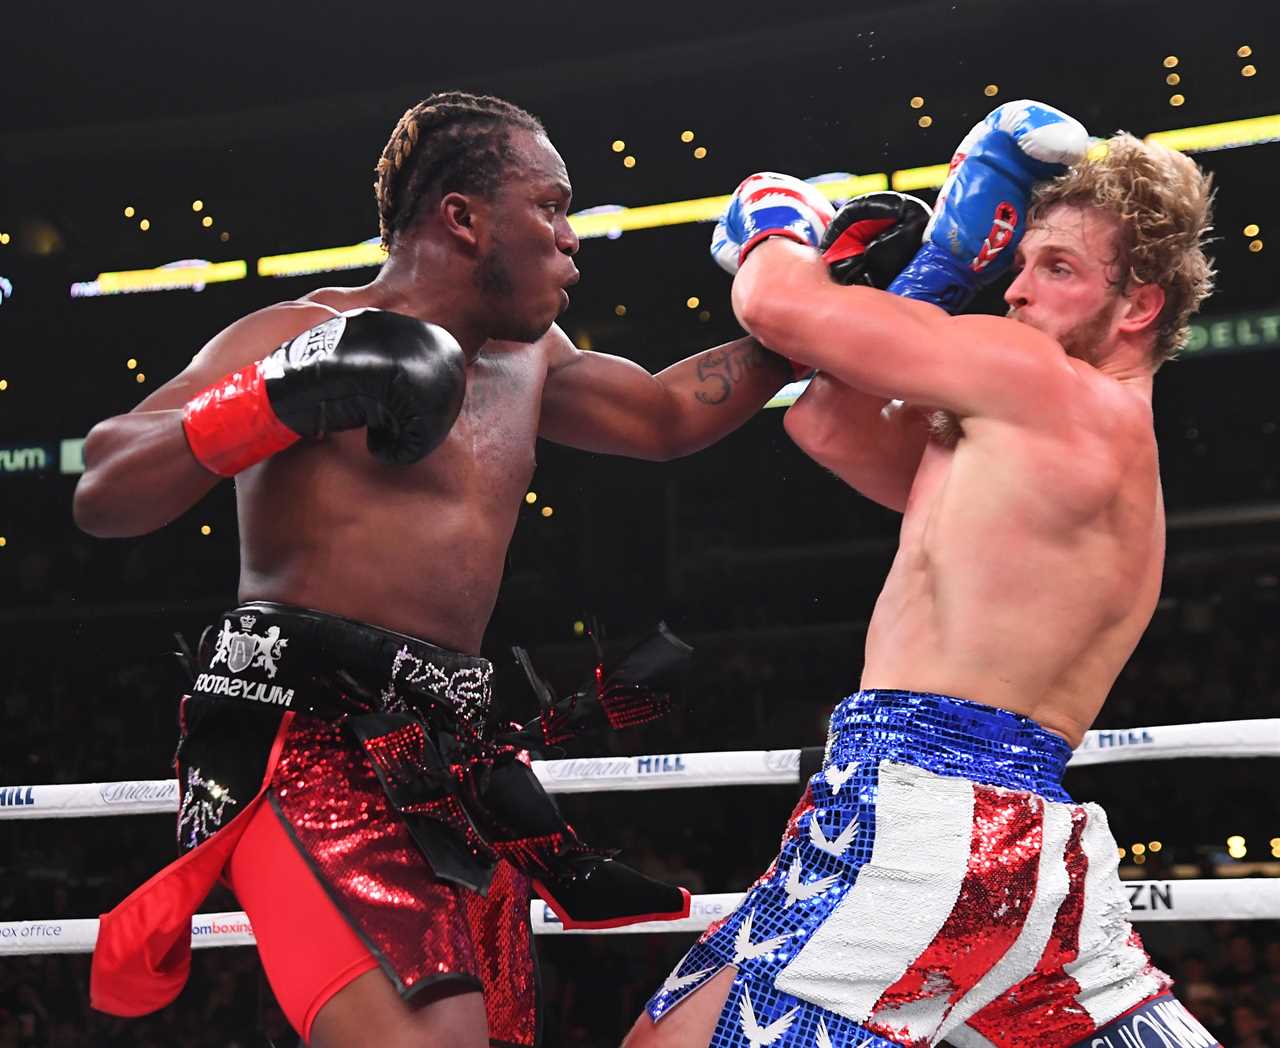 Five fights KSI could next take, including Jake Paul or Tommy Fury, as YouTuber targets boxing's return.